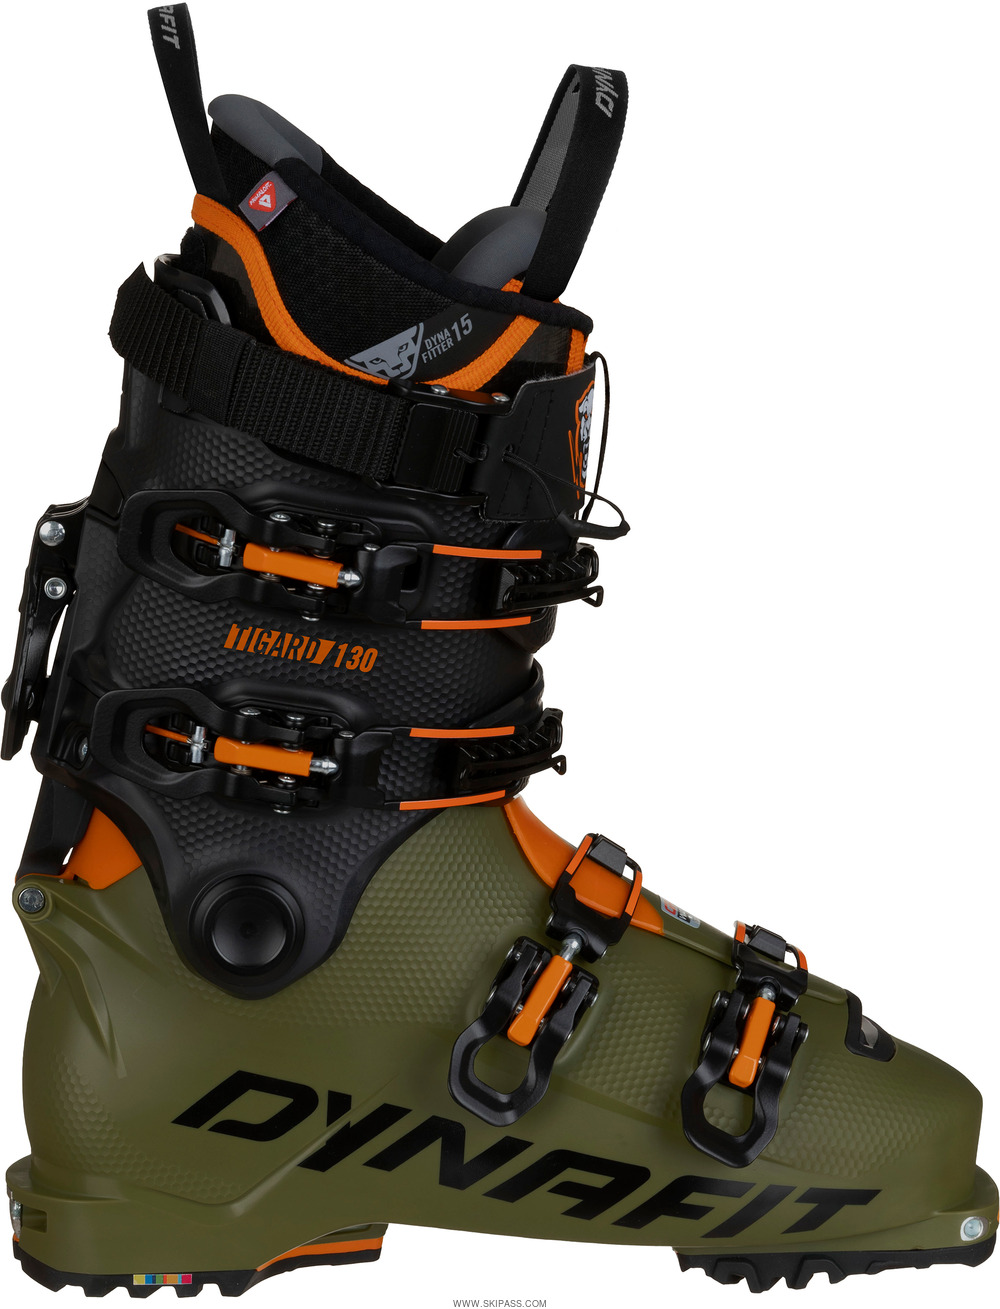 Dynafit Tigard 130 Boot Unisexe